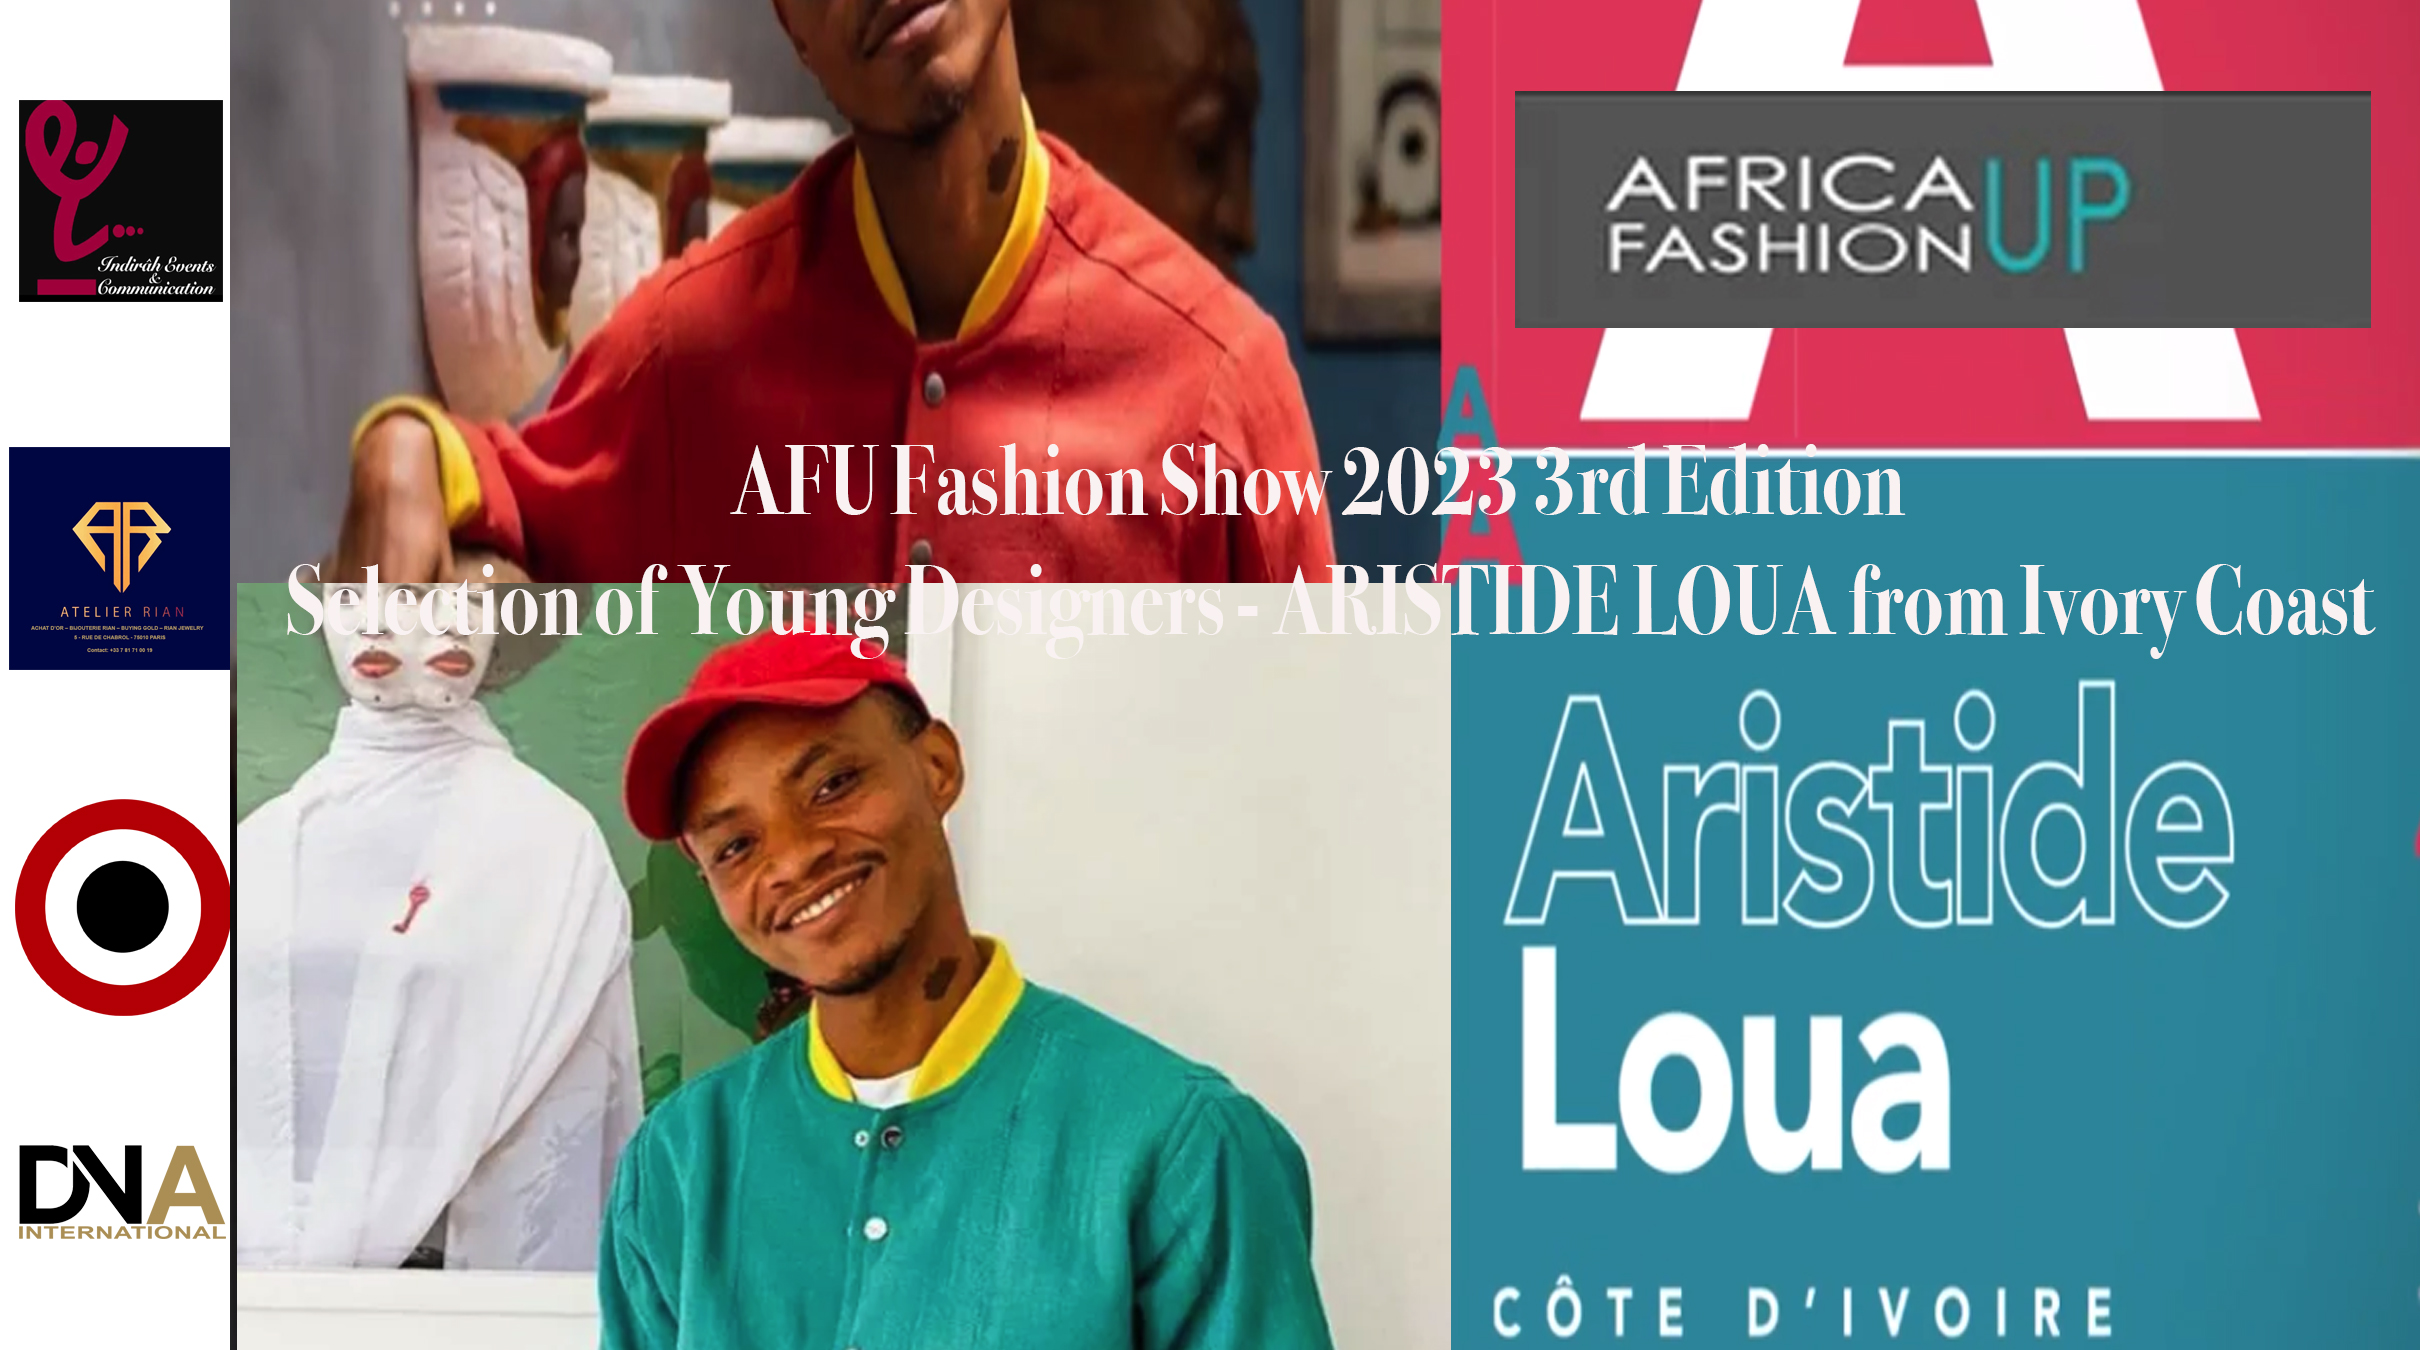 AFU Fashion Show 2023 3rd Edition – Selection of Young Designers – ARISTIDE LOUA from Ivory Coast